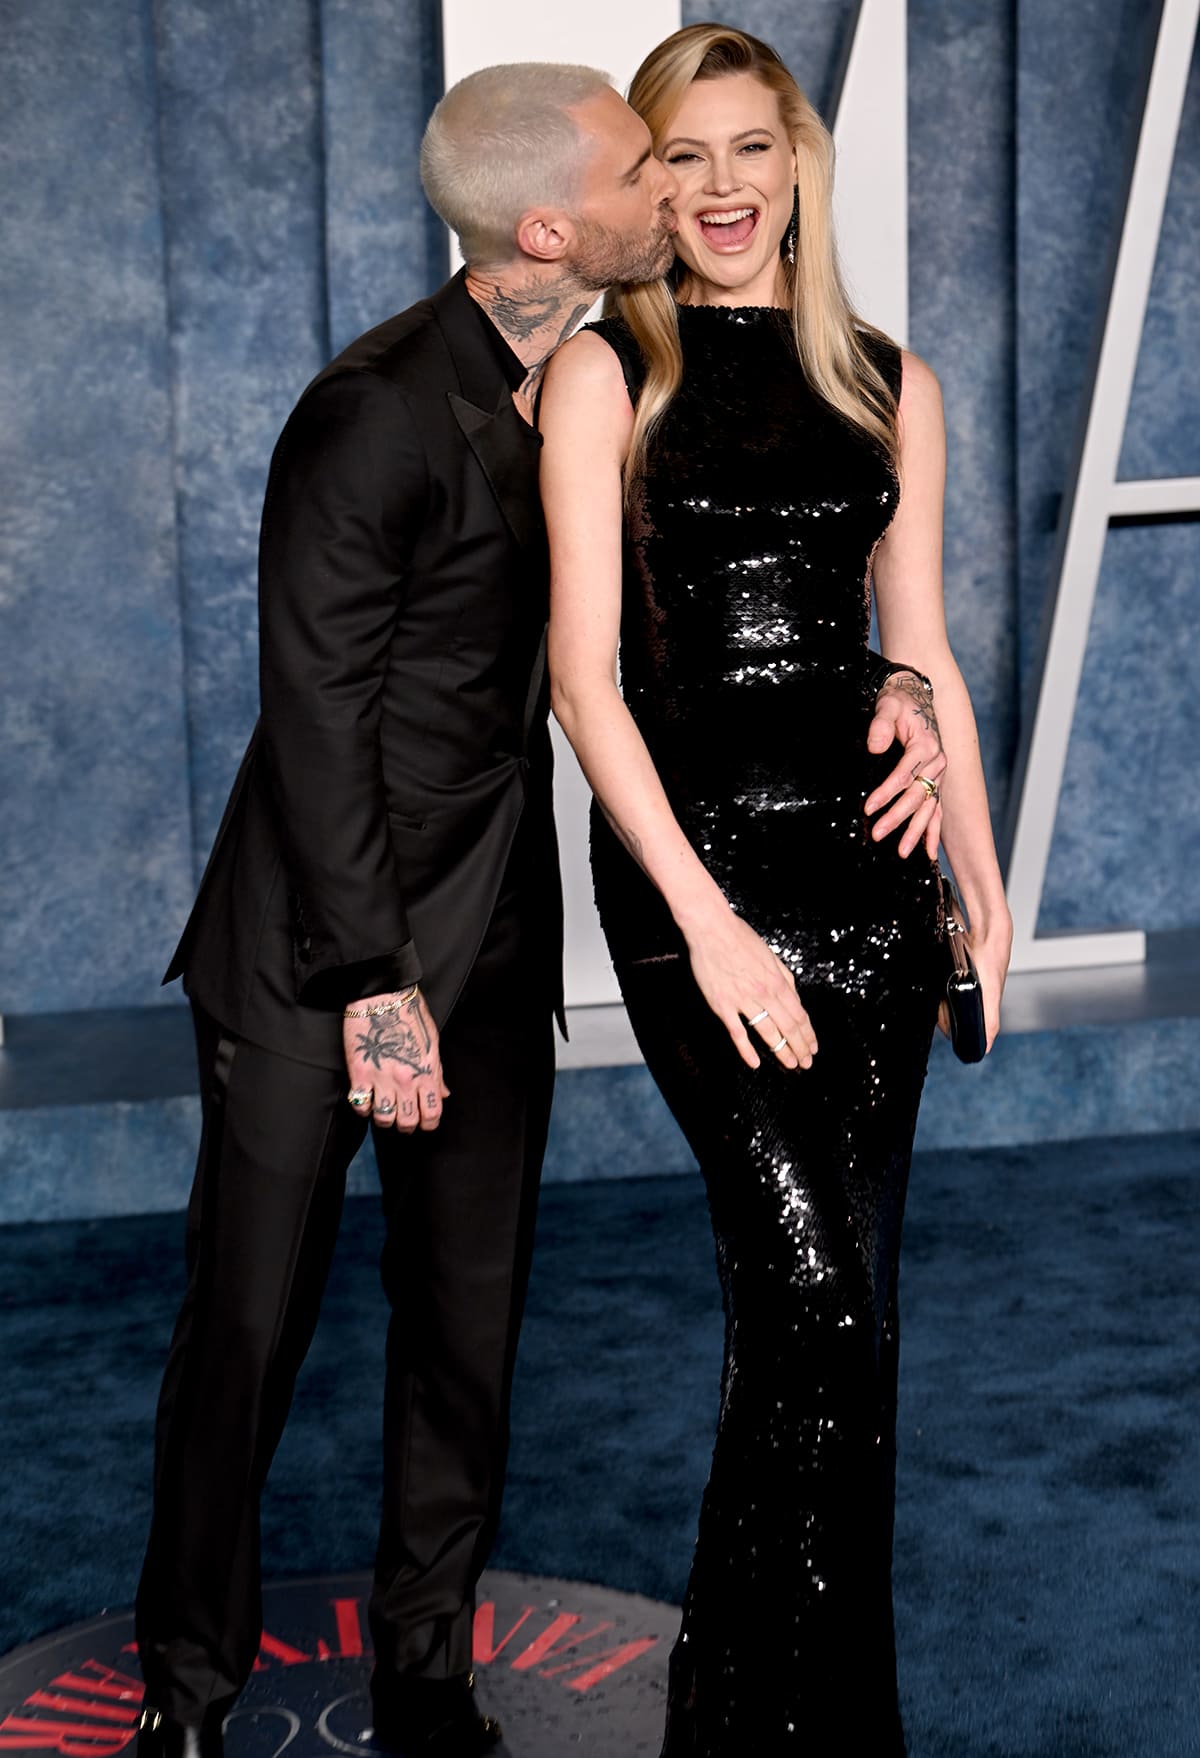 Adam Levine coordinates in a black tuxedo suit with a V-neck tee underneath and buckled shoes